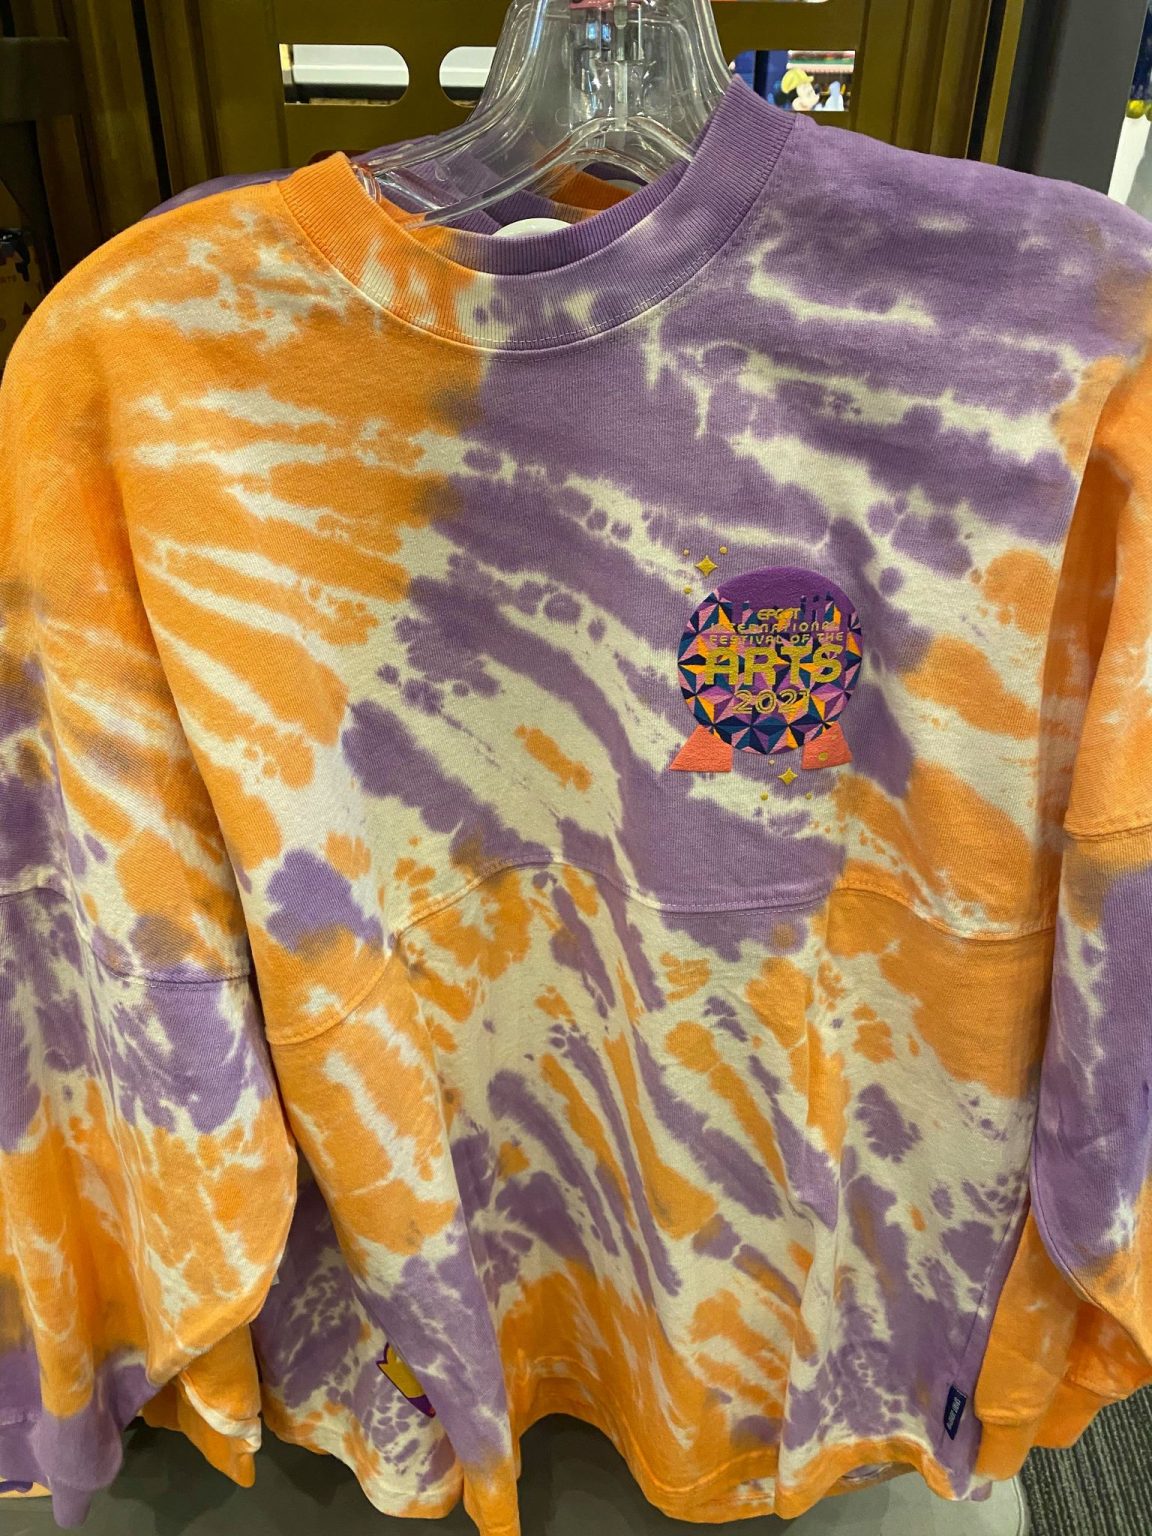 Figment Spirit Jersey has arrived at Festival of the Arts 2021 ...